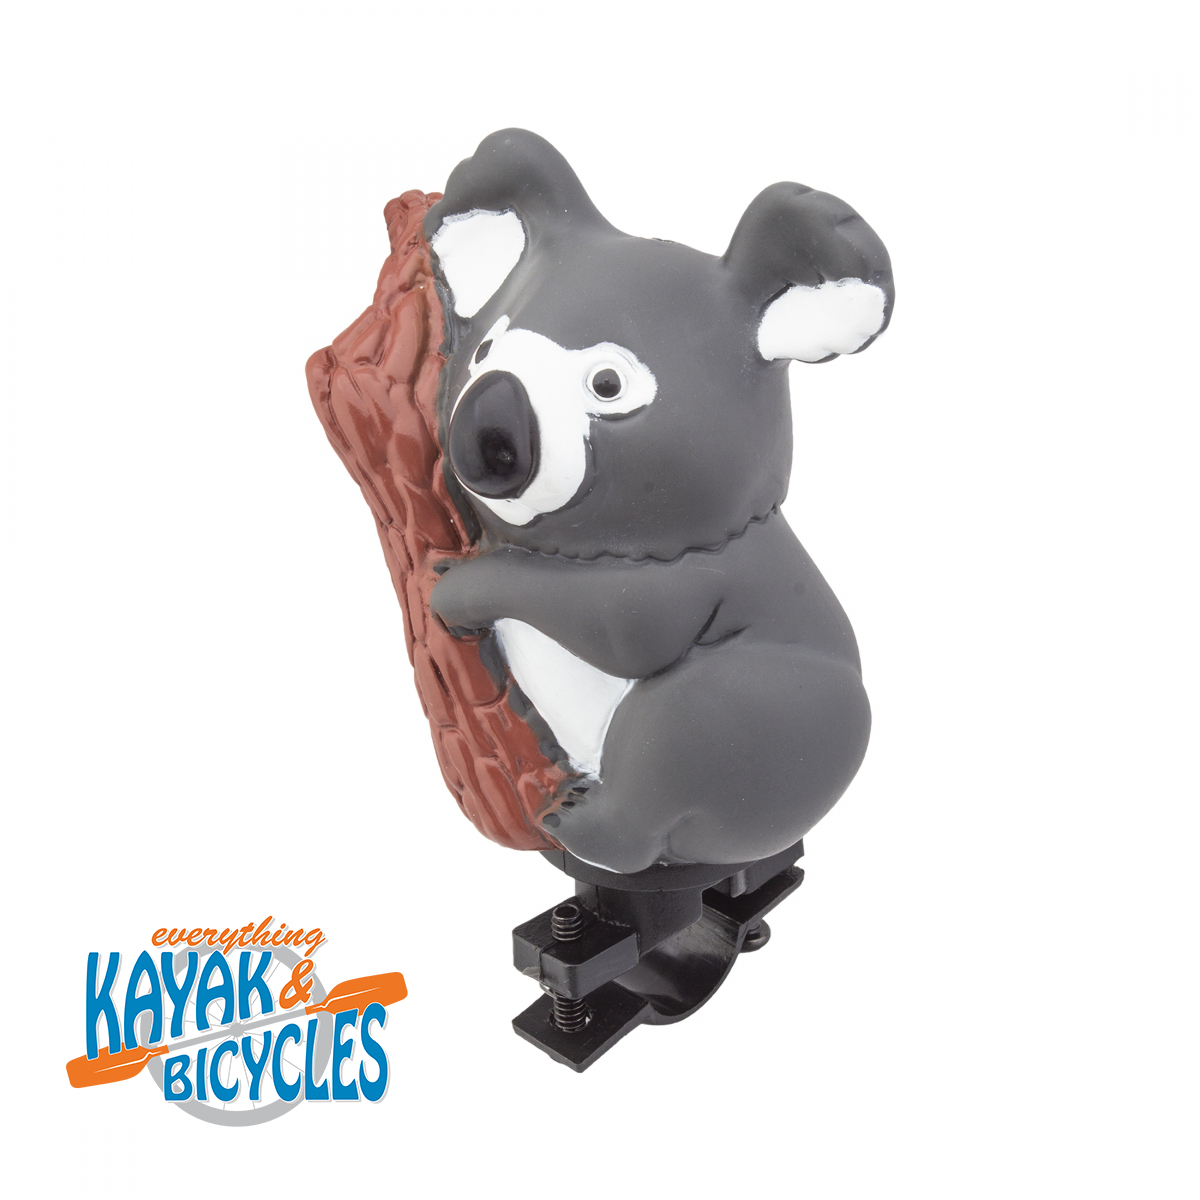 Koala Bike Horn 
Novelty horns that are great for kids and adults alike
Perfect for novice riders as well as serious riders who like a little flair, personality, or humor for their group rides
Fits most handlebars